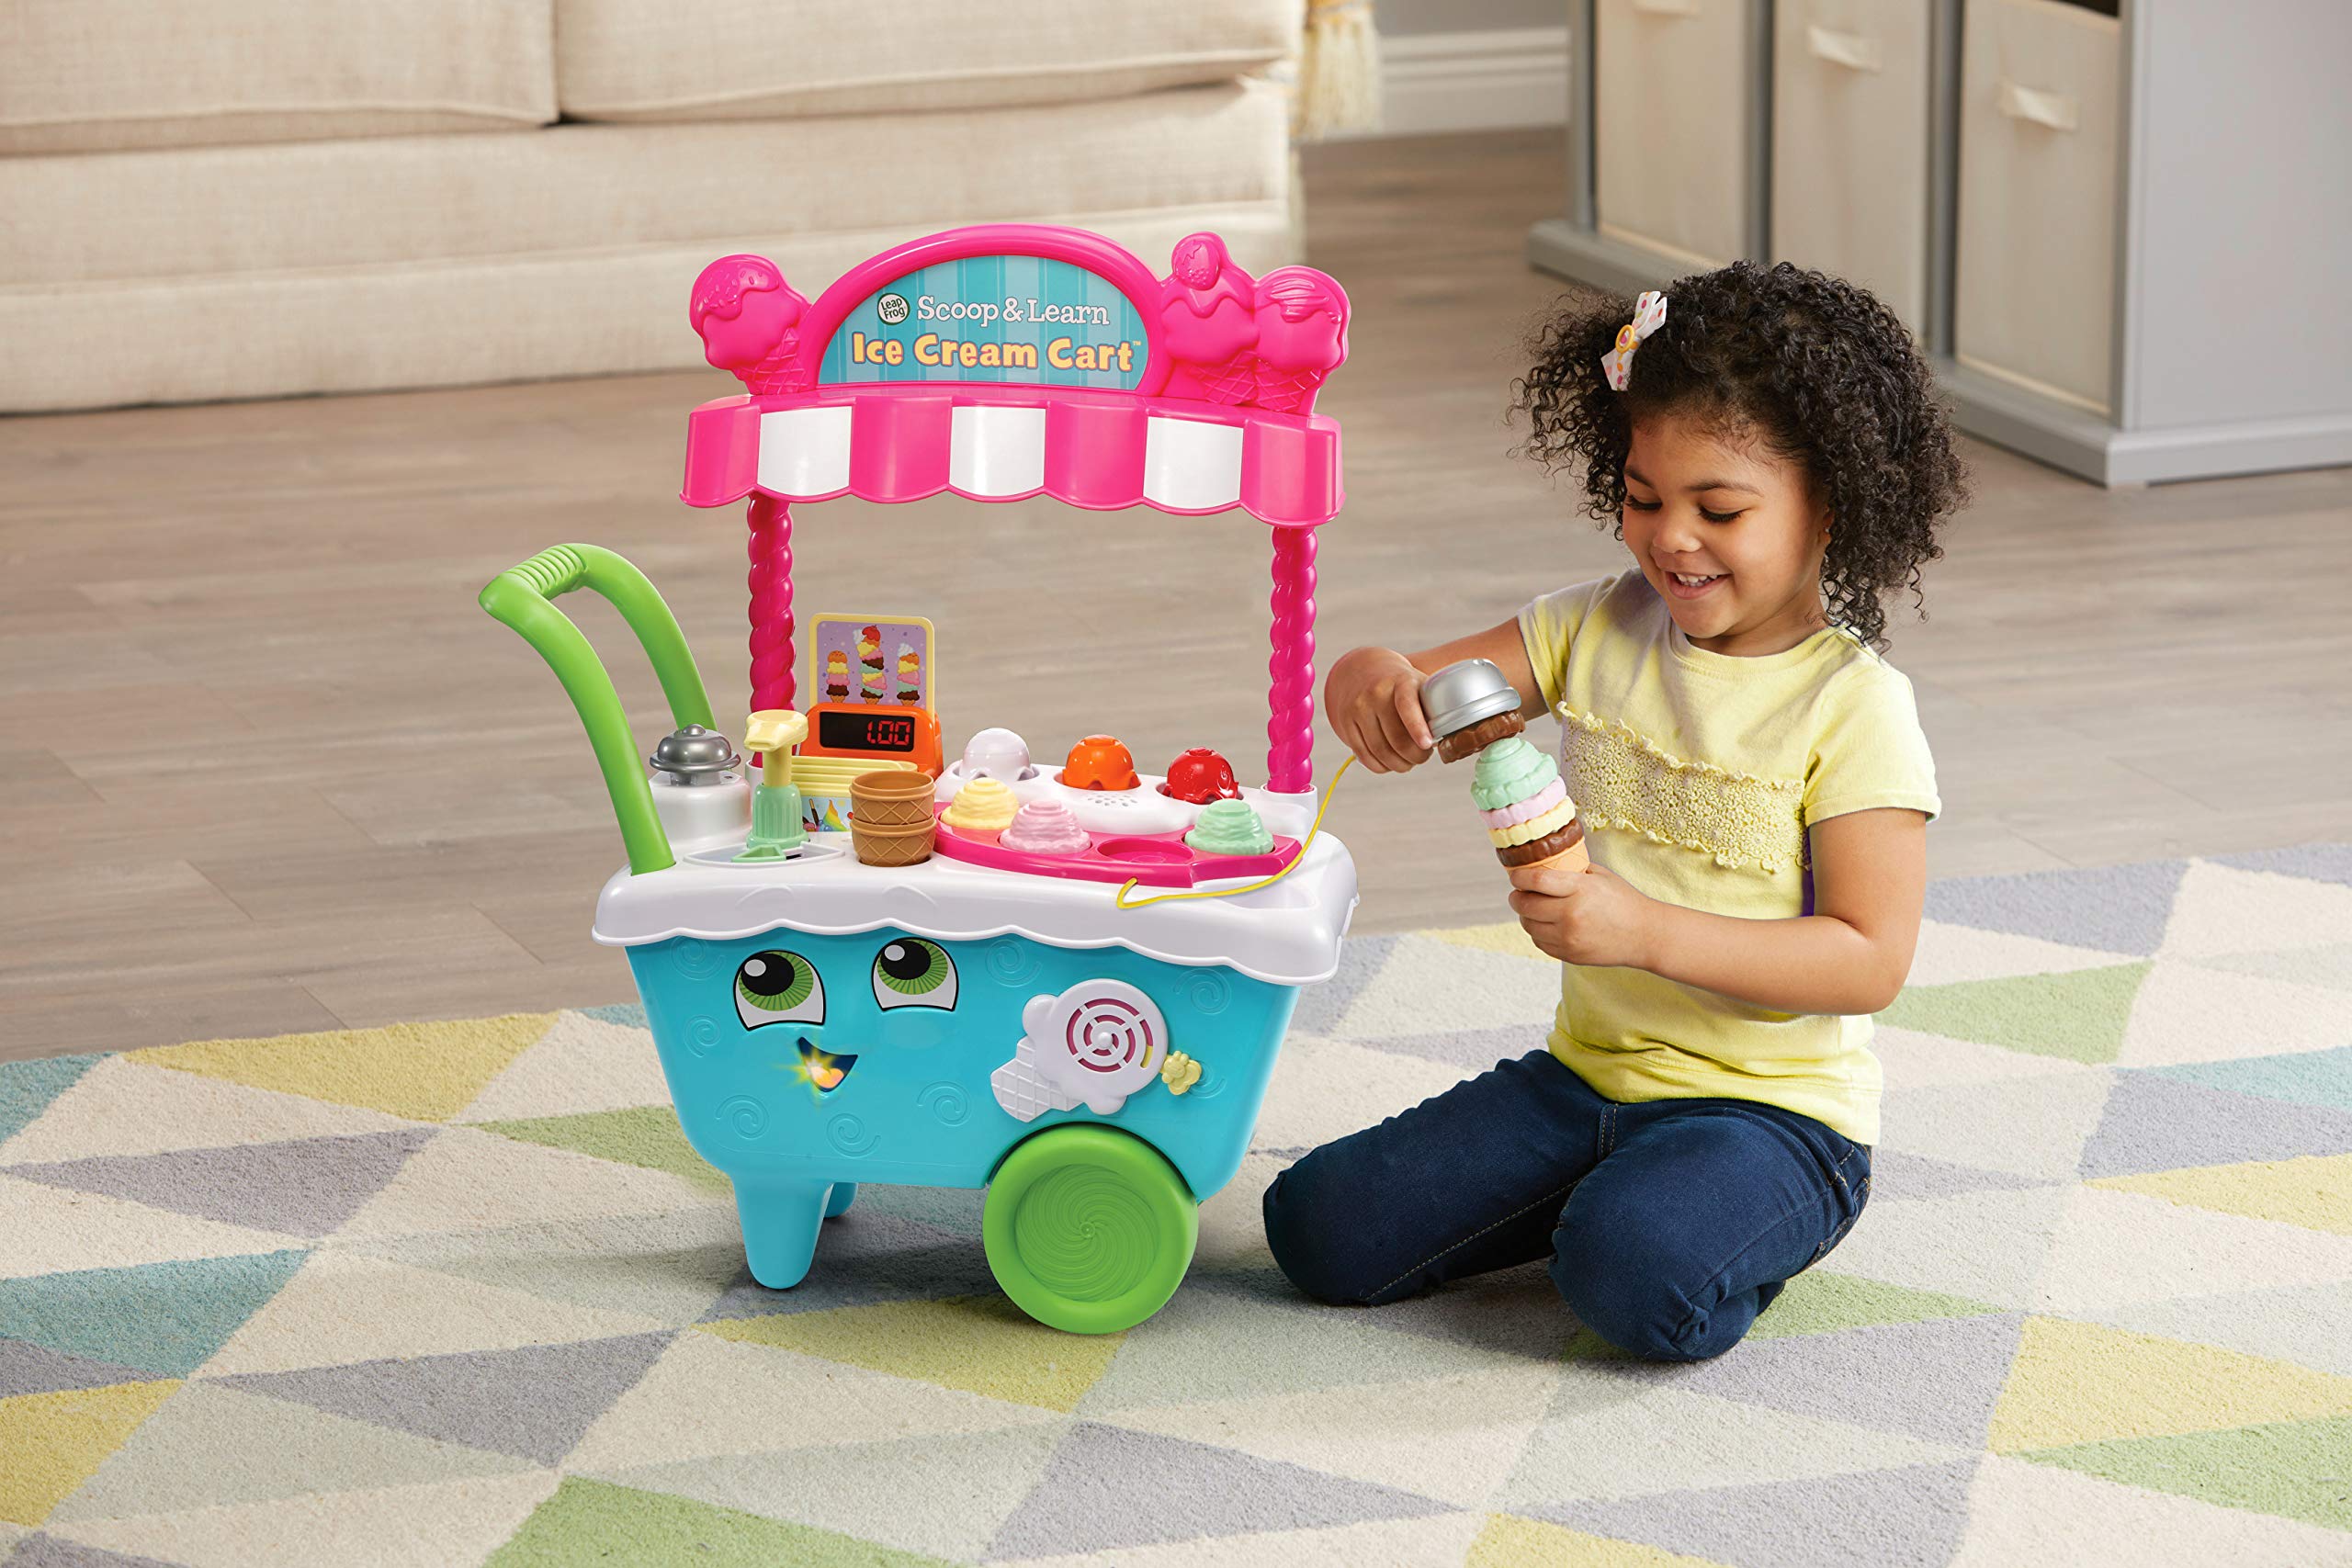 LeapFrog Scoop and Learn Ice Cream Cart 7.87 x 20.58 x 23.77 inches